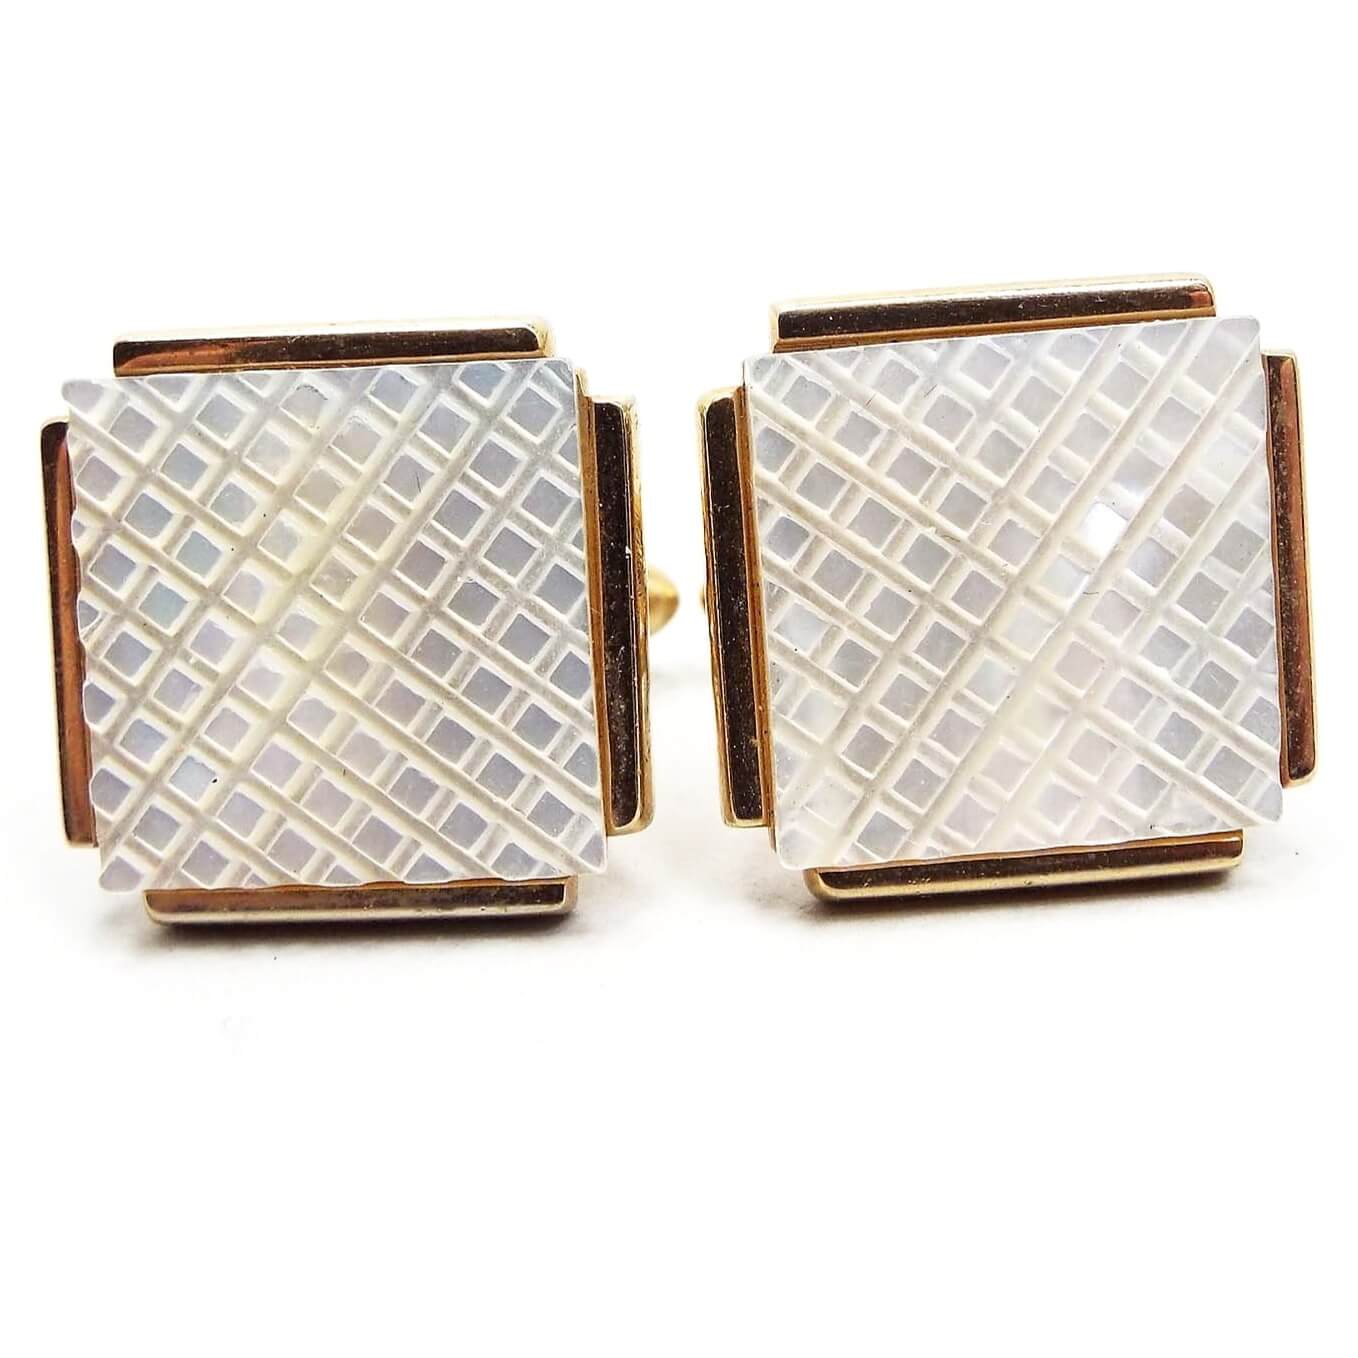 Front view of the Swank Mid Century vintage mother of pearl cufflinks. They are square in shape with bars of gold tone color metal on each side. The middle has a square pearly white mother of pearl shell cab that is carved with a small diamond shape pattern.